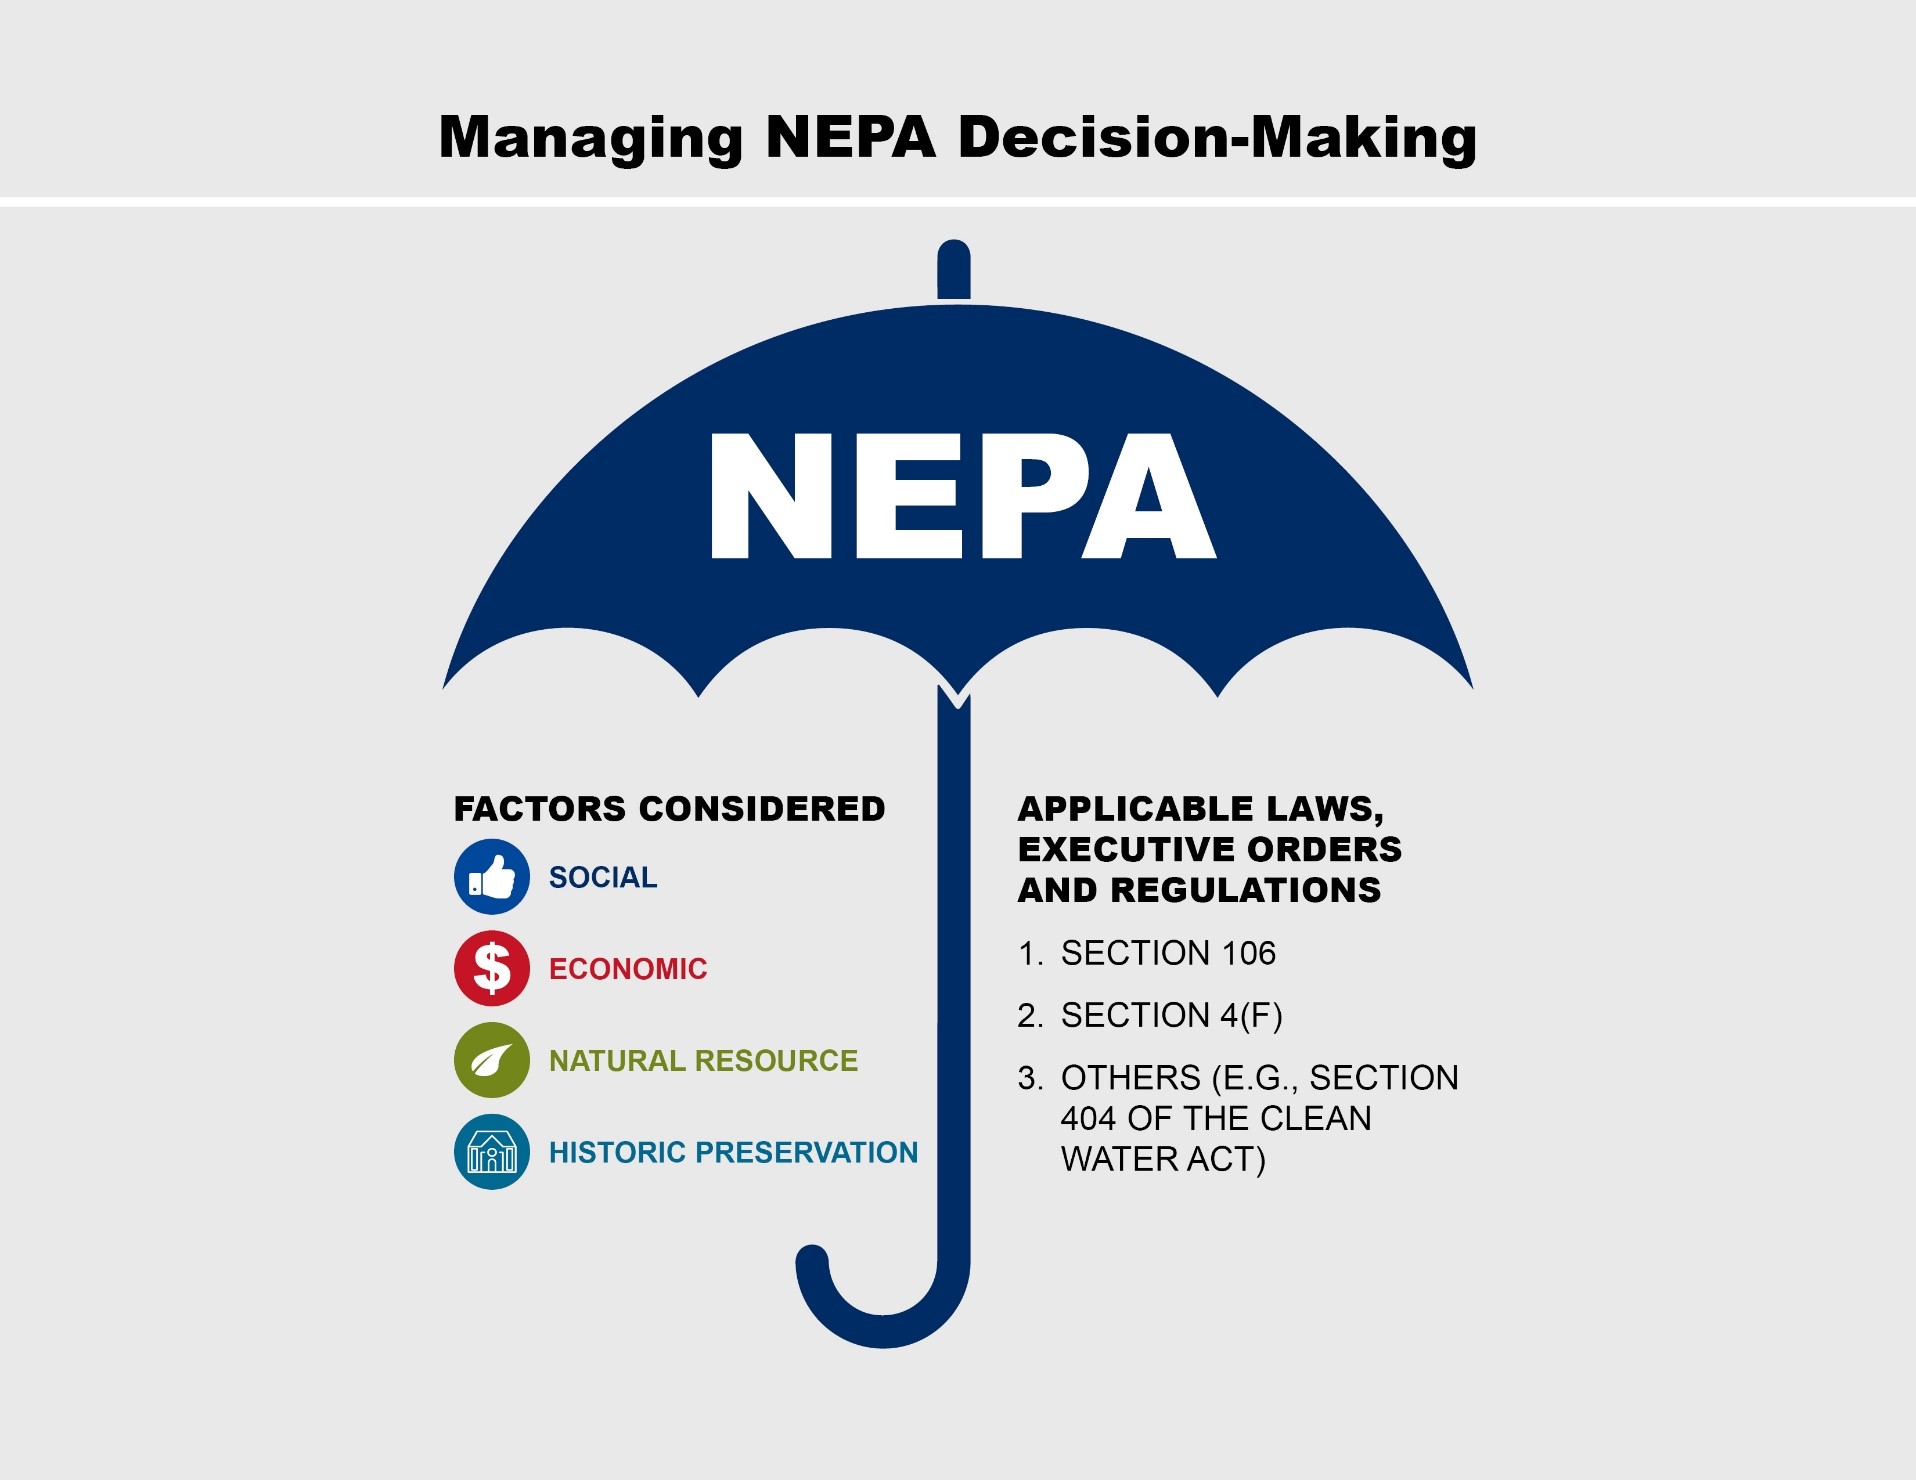 A graphic of a NEPA umbrella showing factors considered and applicable laws, executive orders, and regulations in the NEPA process